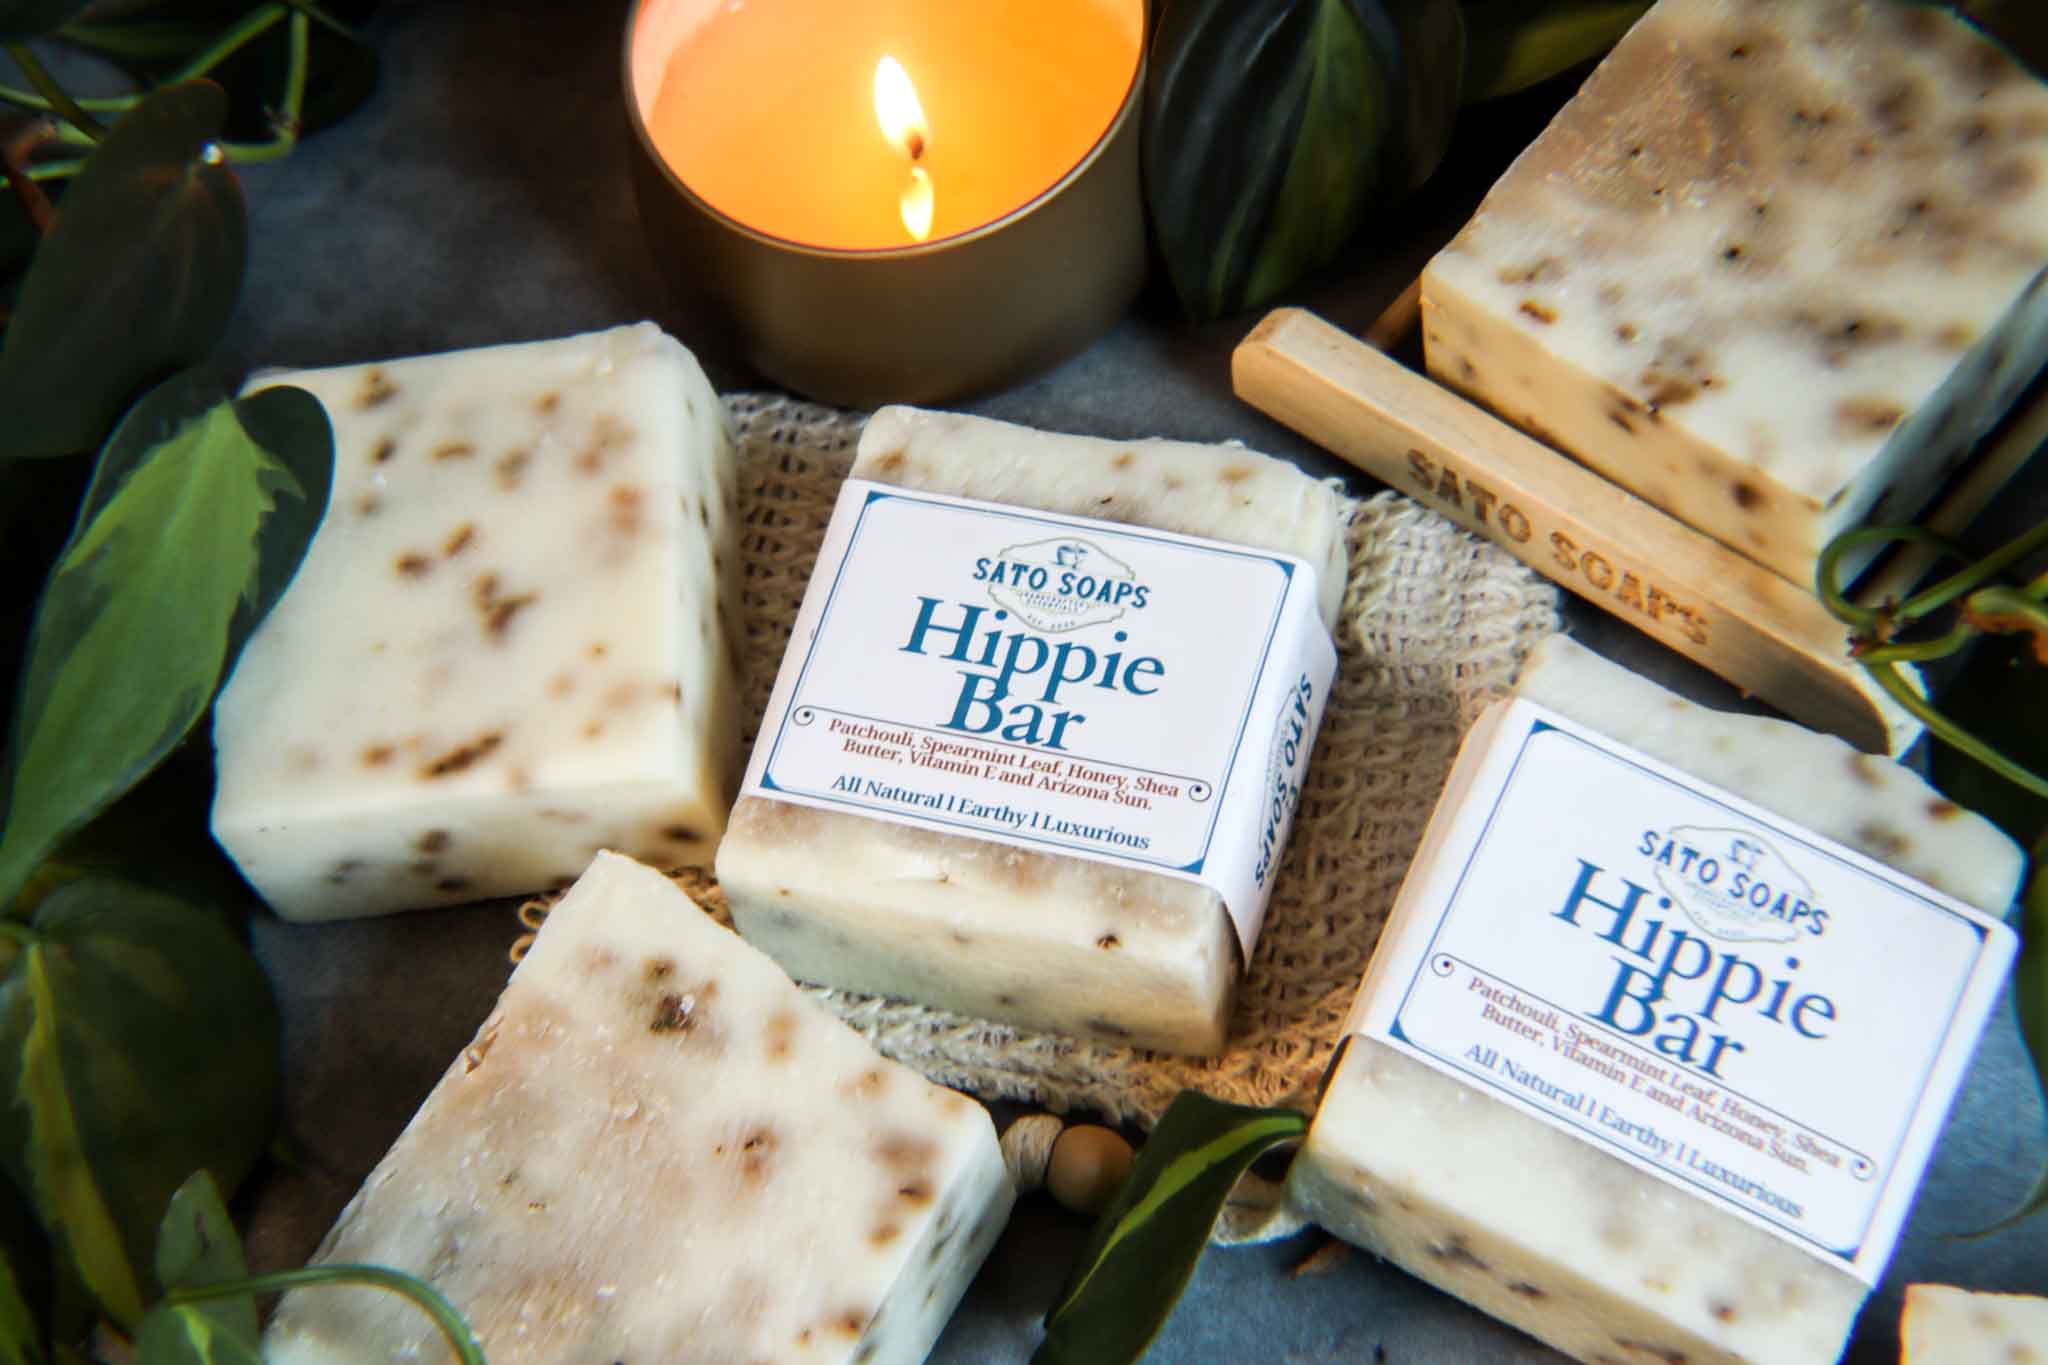 The Hippie Bar Soap (Patchouli and Spearmint Leaf Herbal Soap)